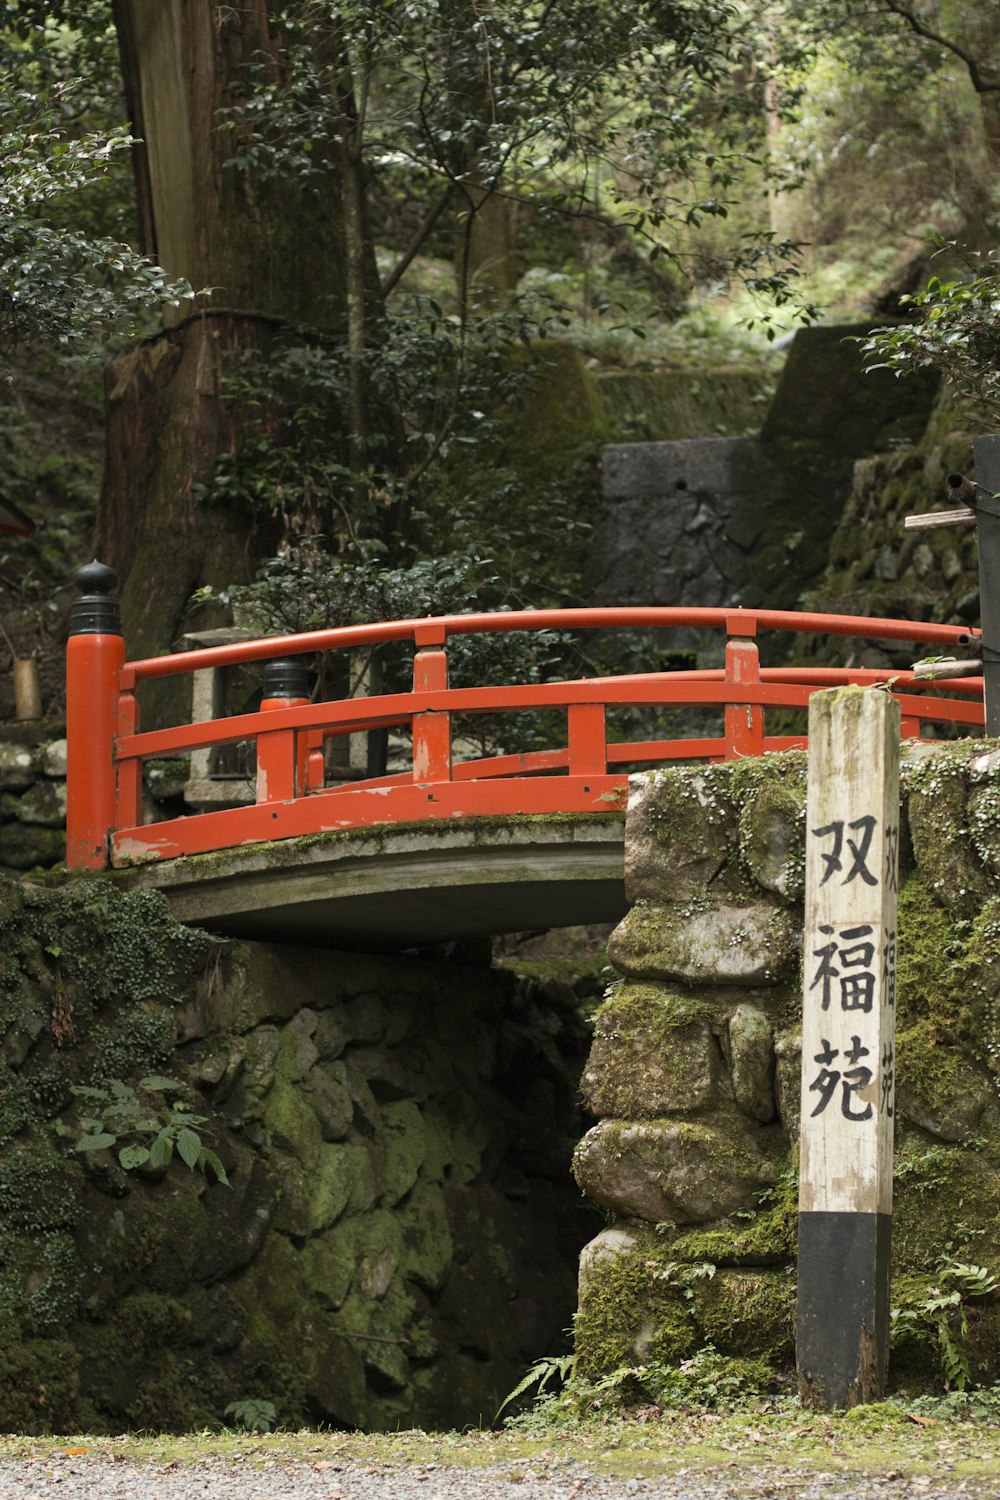 wooden bridge with signage surrounded by green leafed plant